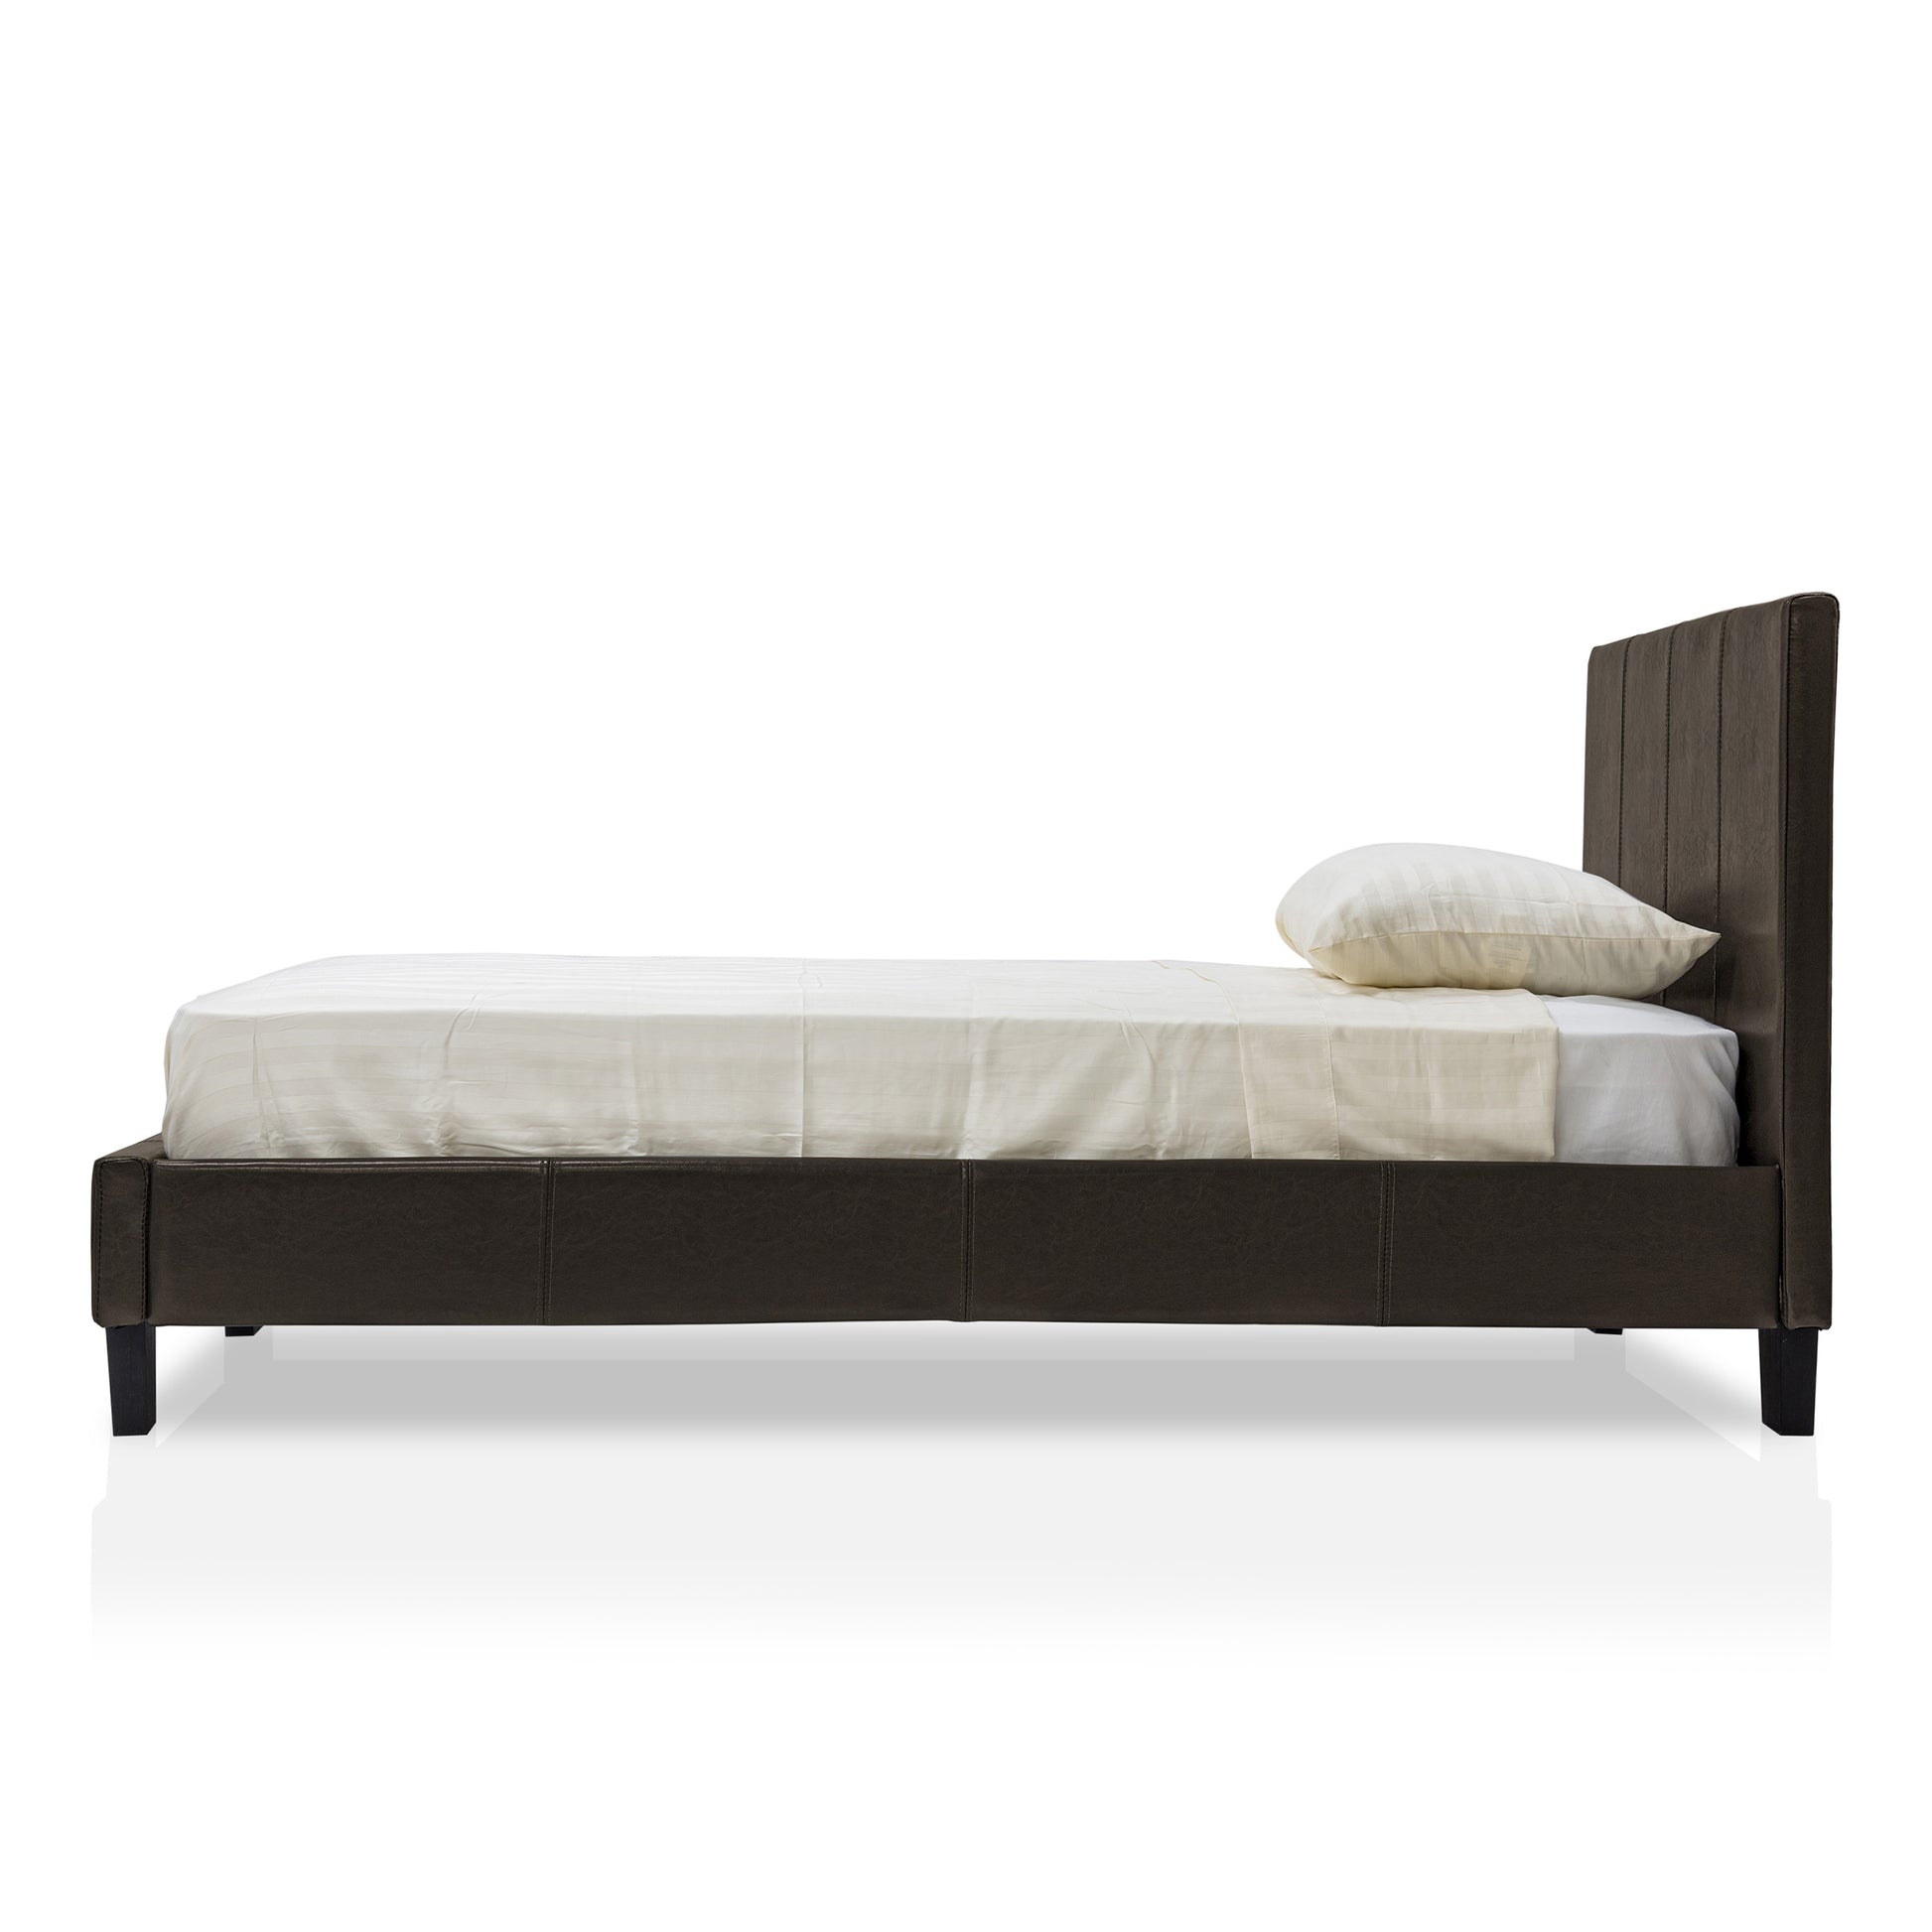 Front-facing side view of a contemporary espresso faux leather twin platform bed with linens on a white background